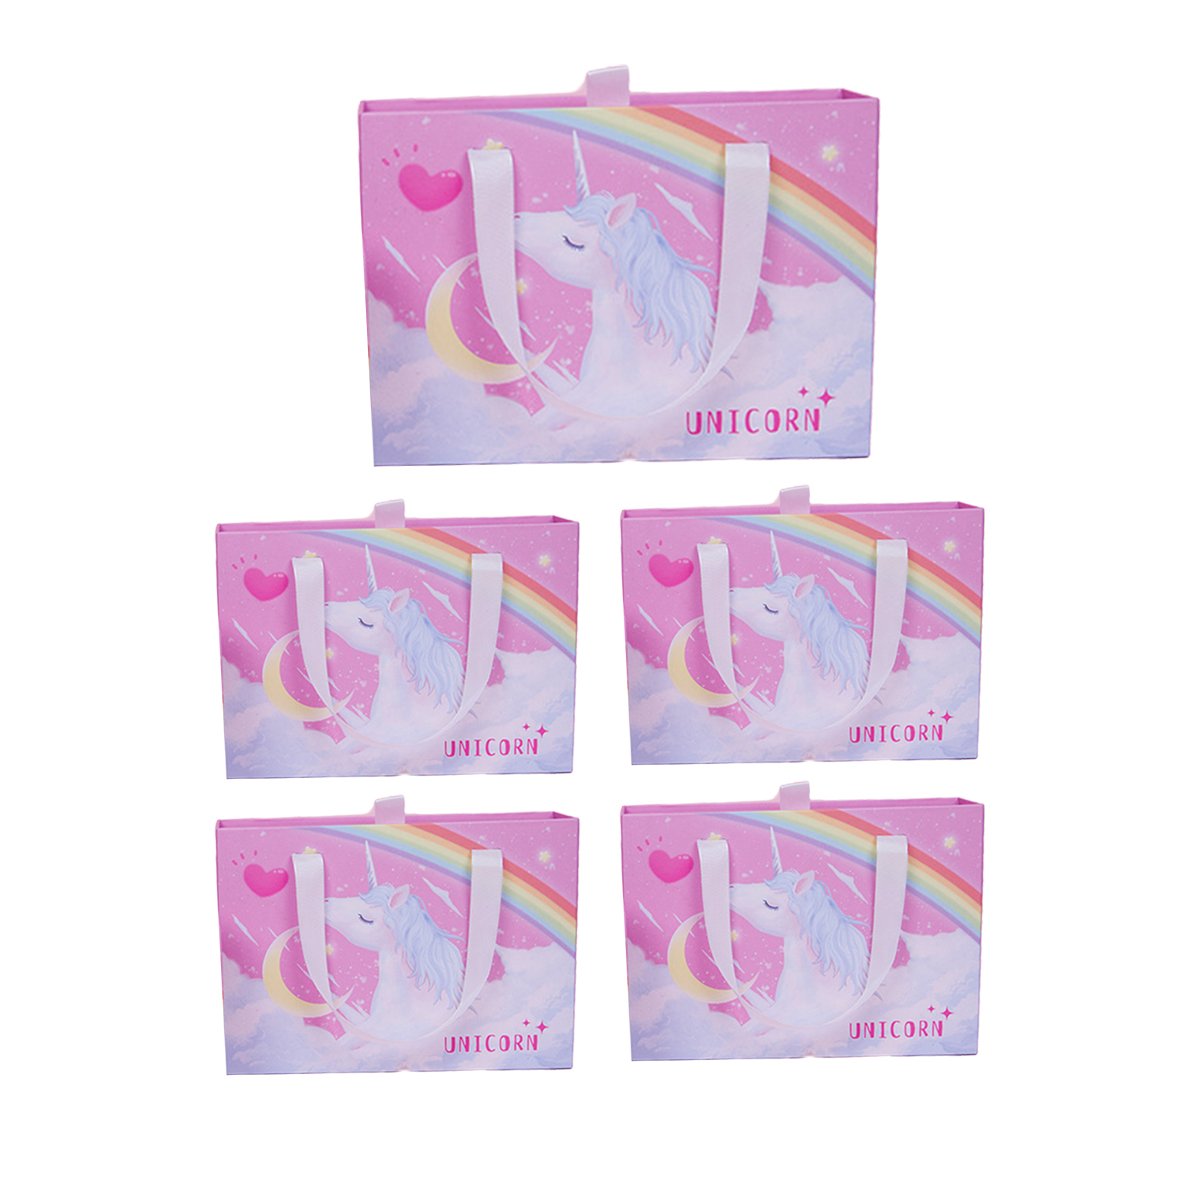 Delight with a Unicorn Gift Box Set for Magical Presentations